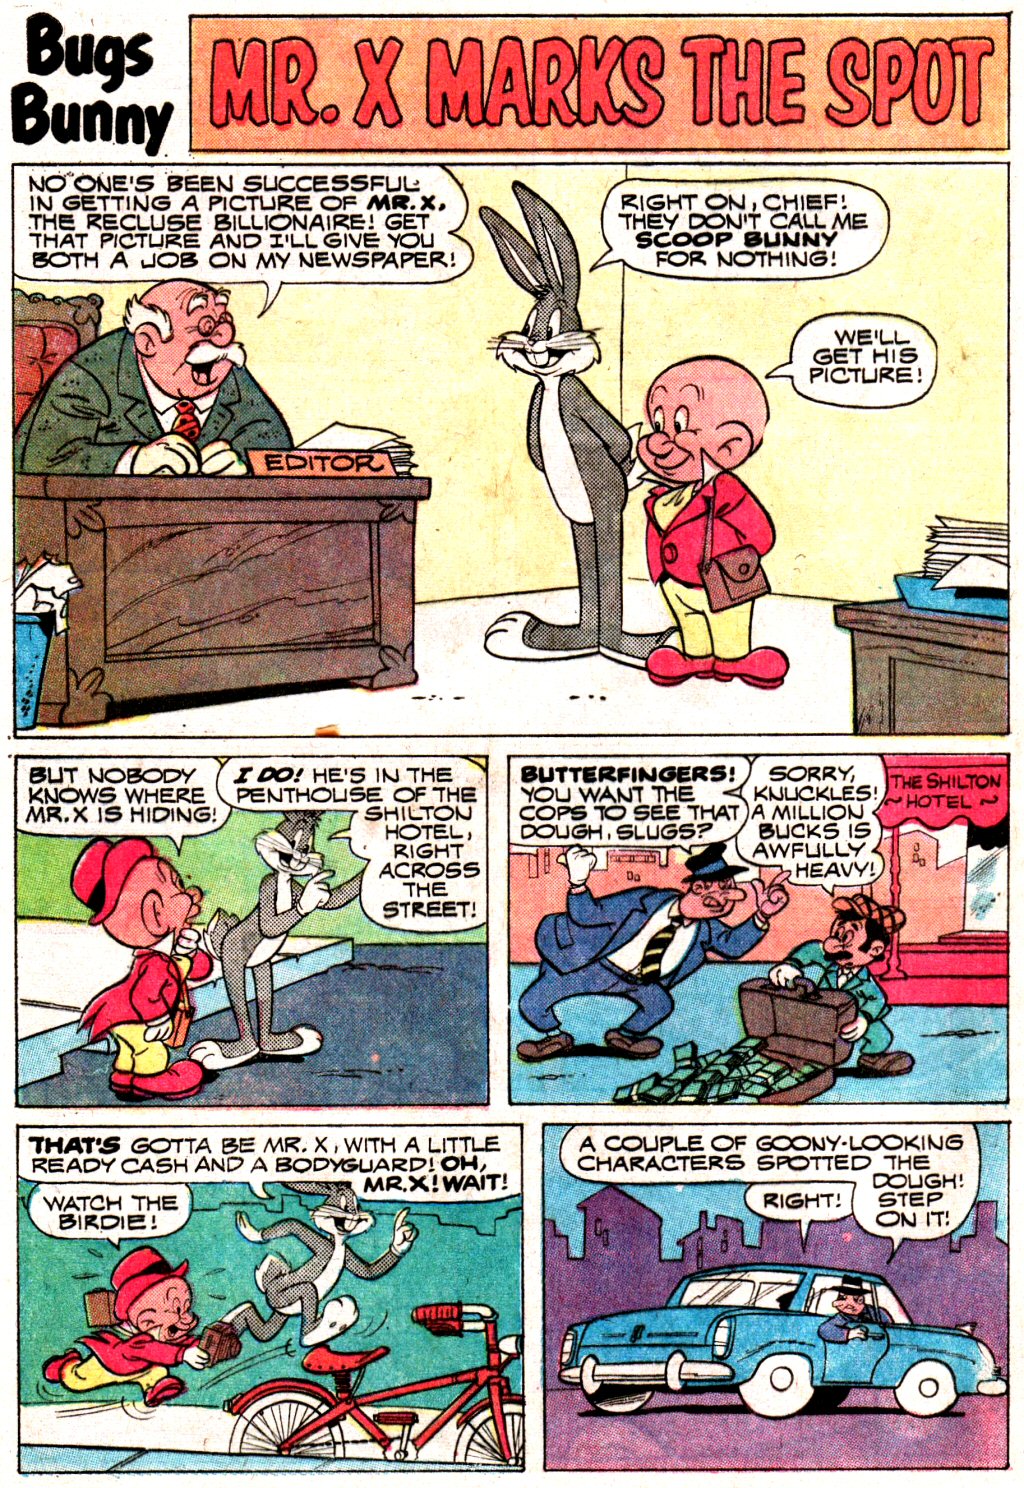 Read online Bugs Bunny comic -  Issue #148 - 28